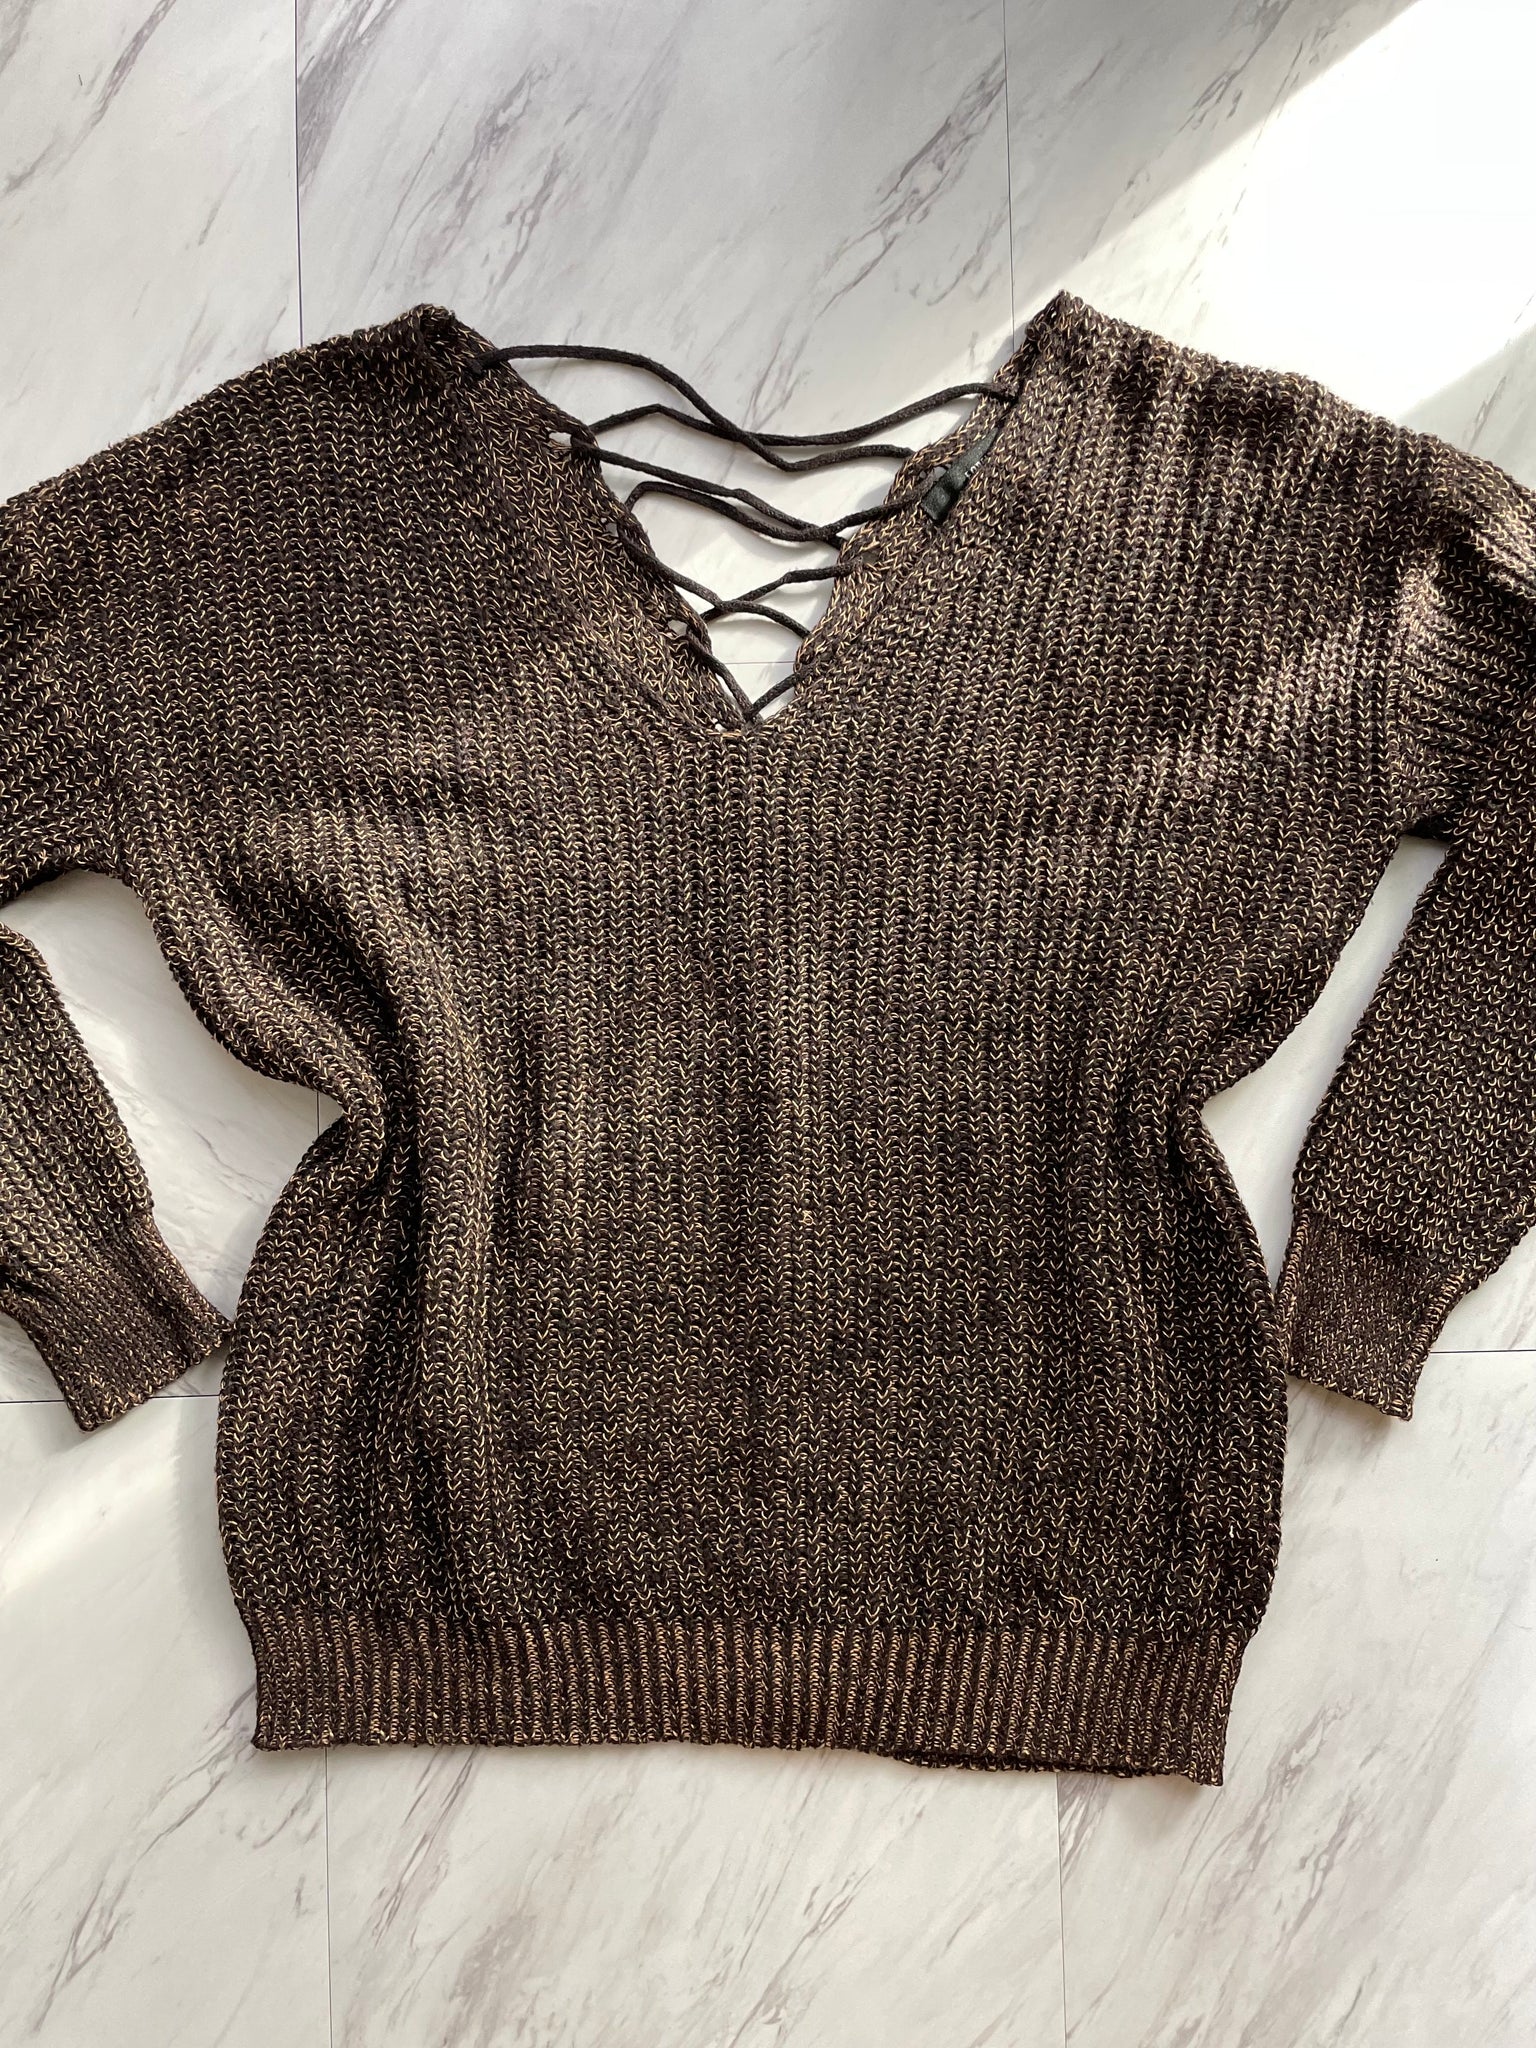 Forever 21 lace up sweater, Size S